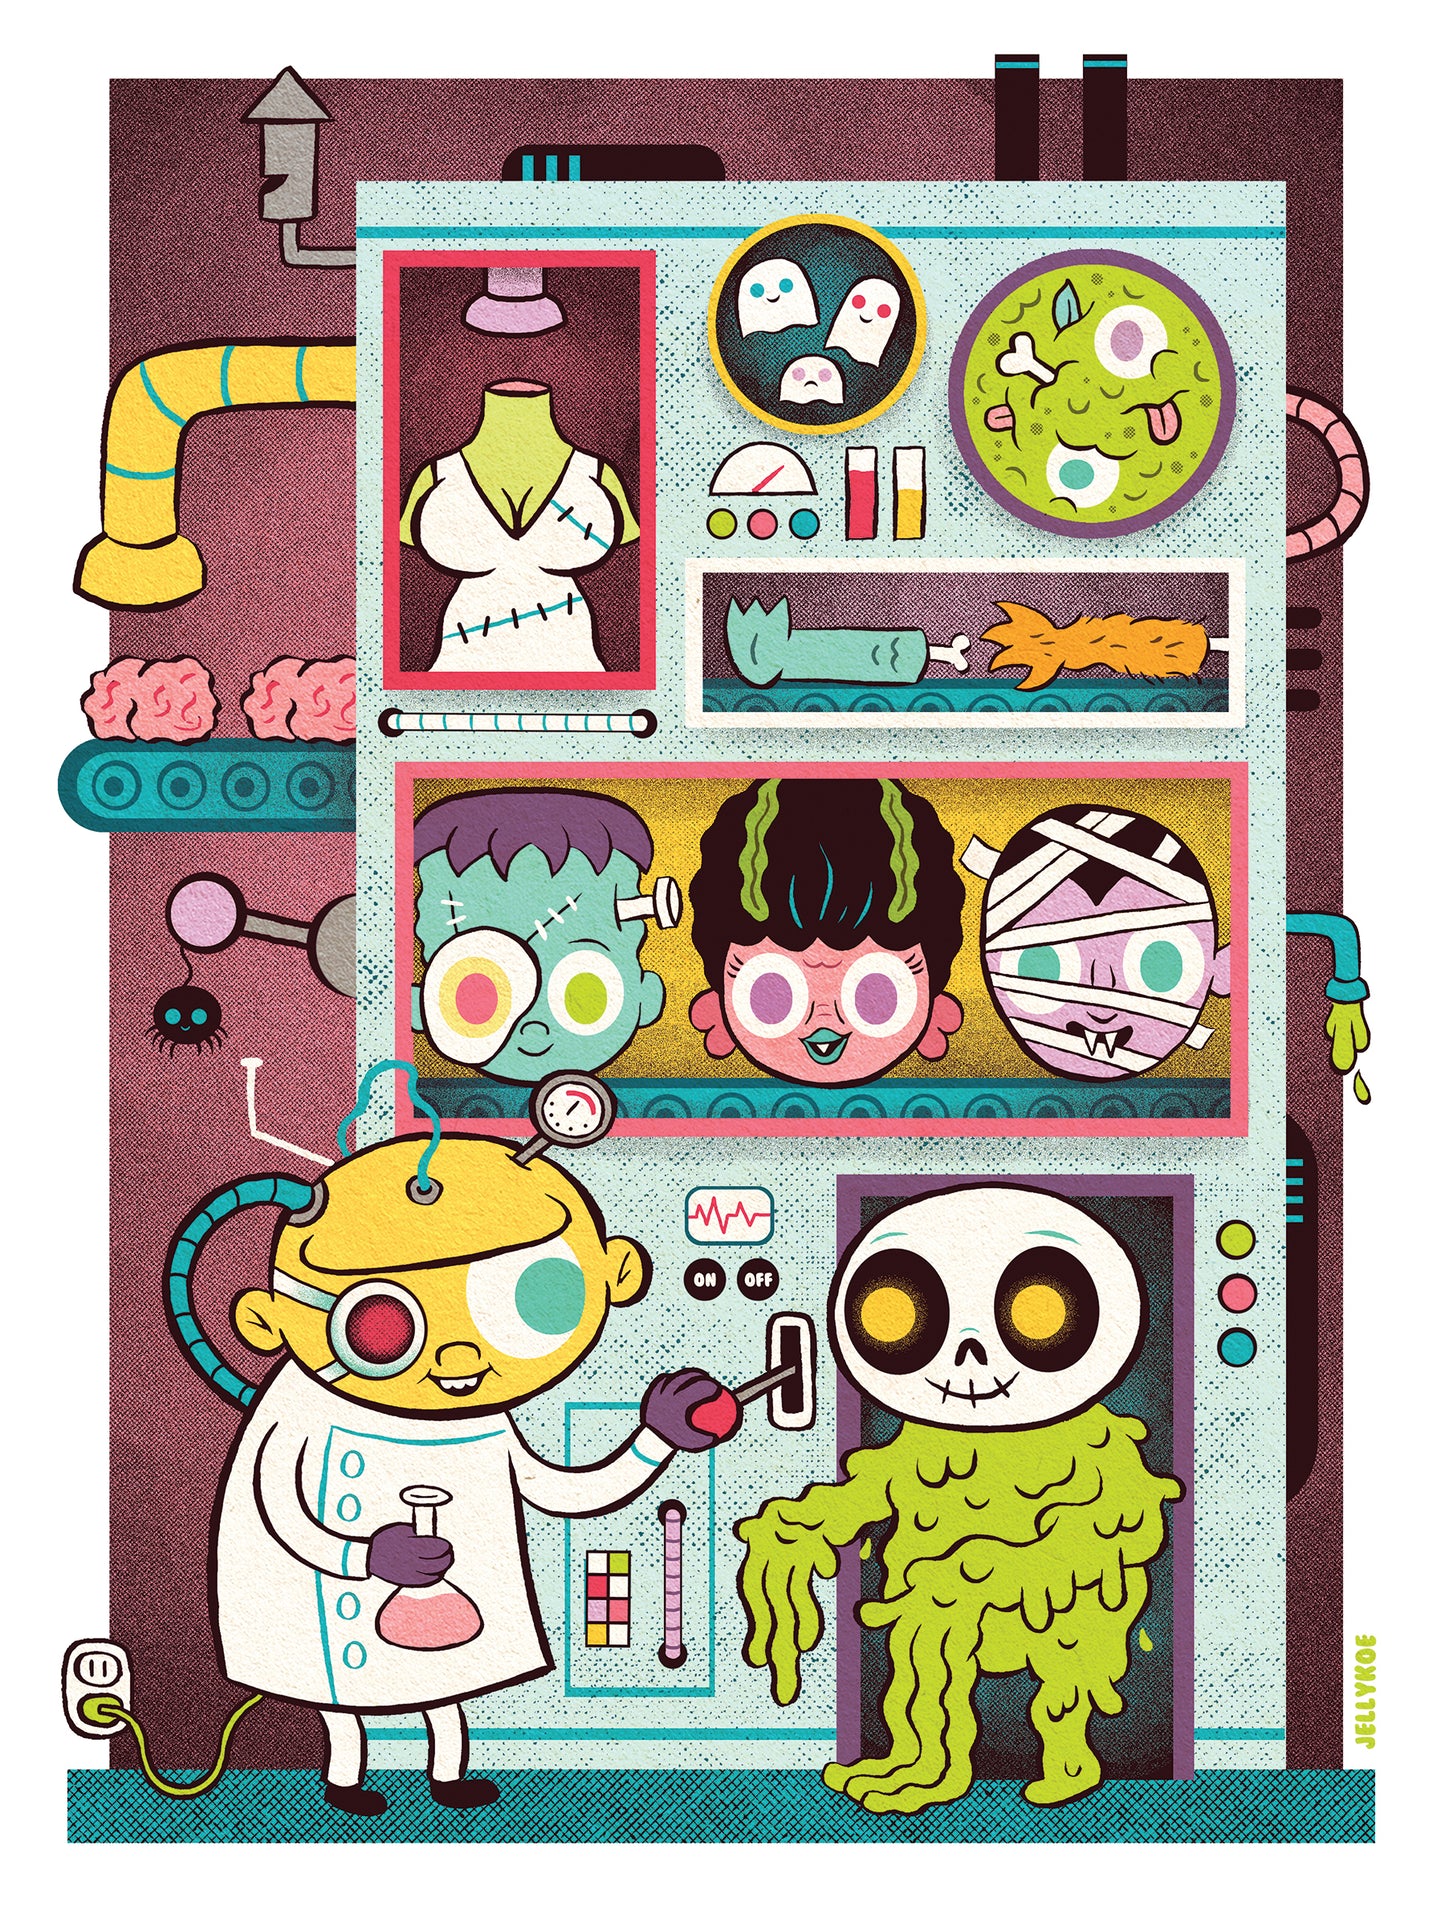 "Monster Factory" 12 x 16 limited edition poster print